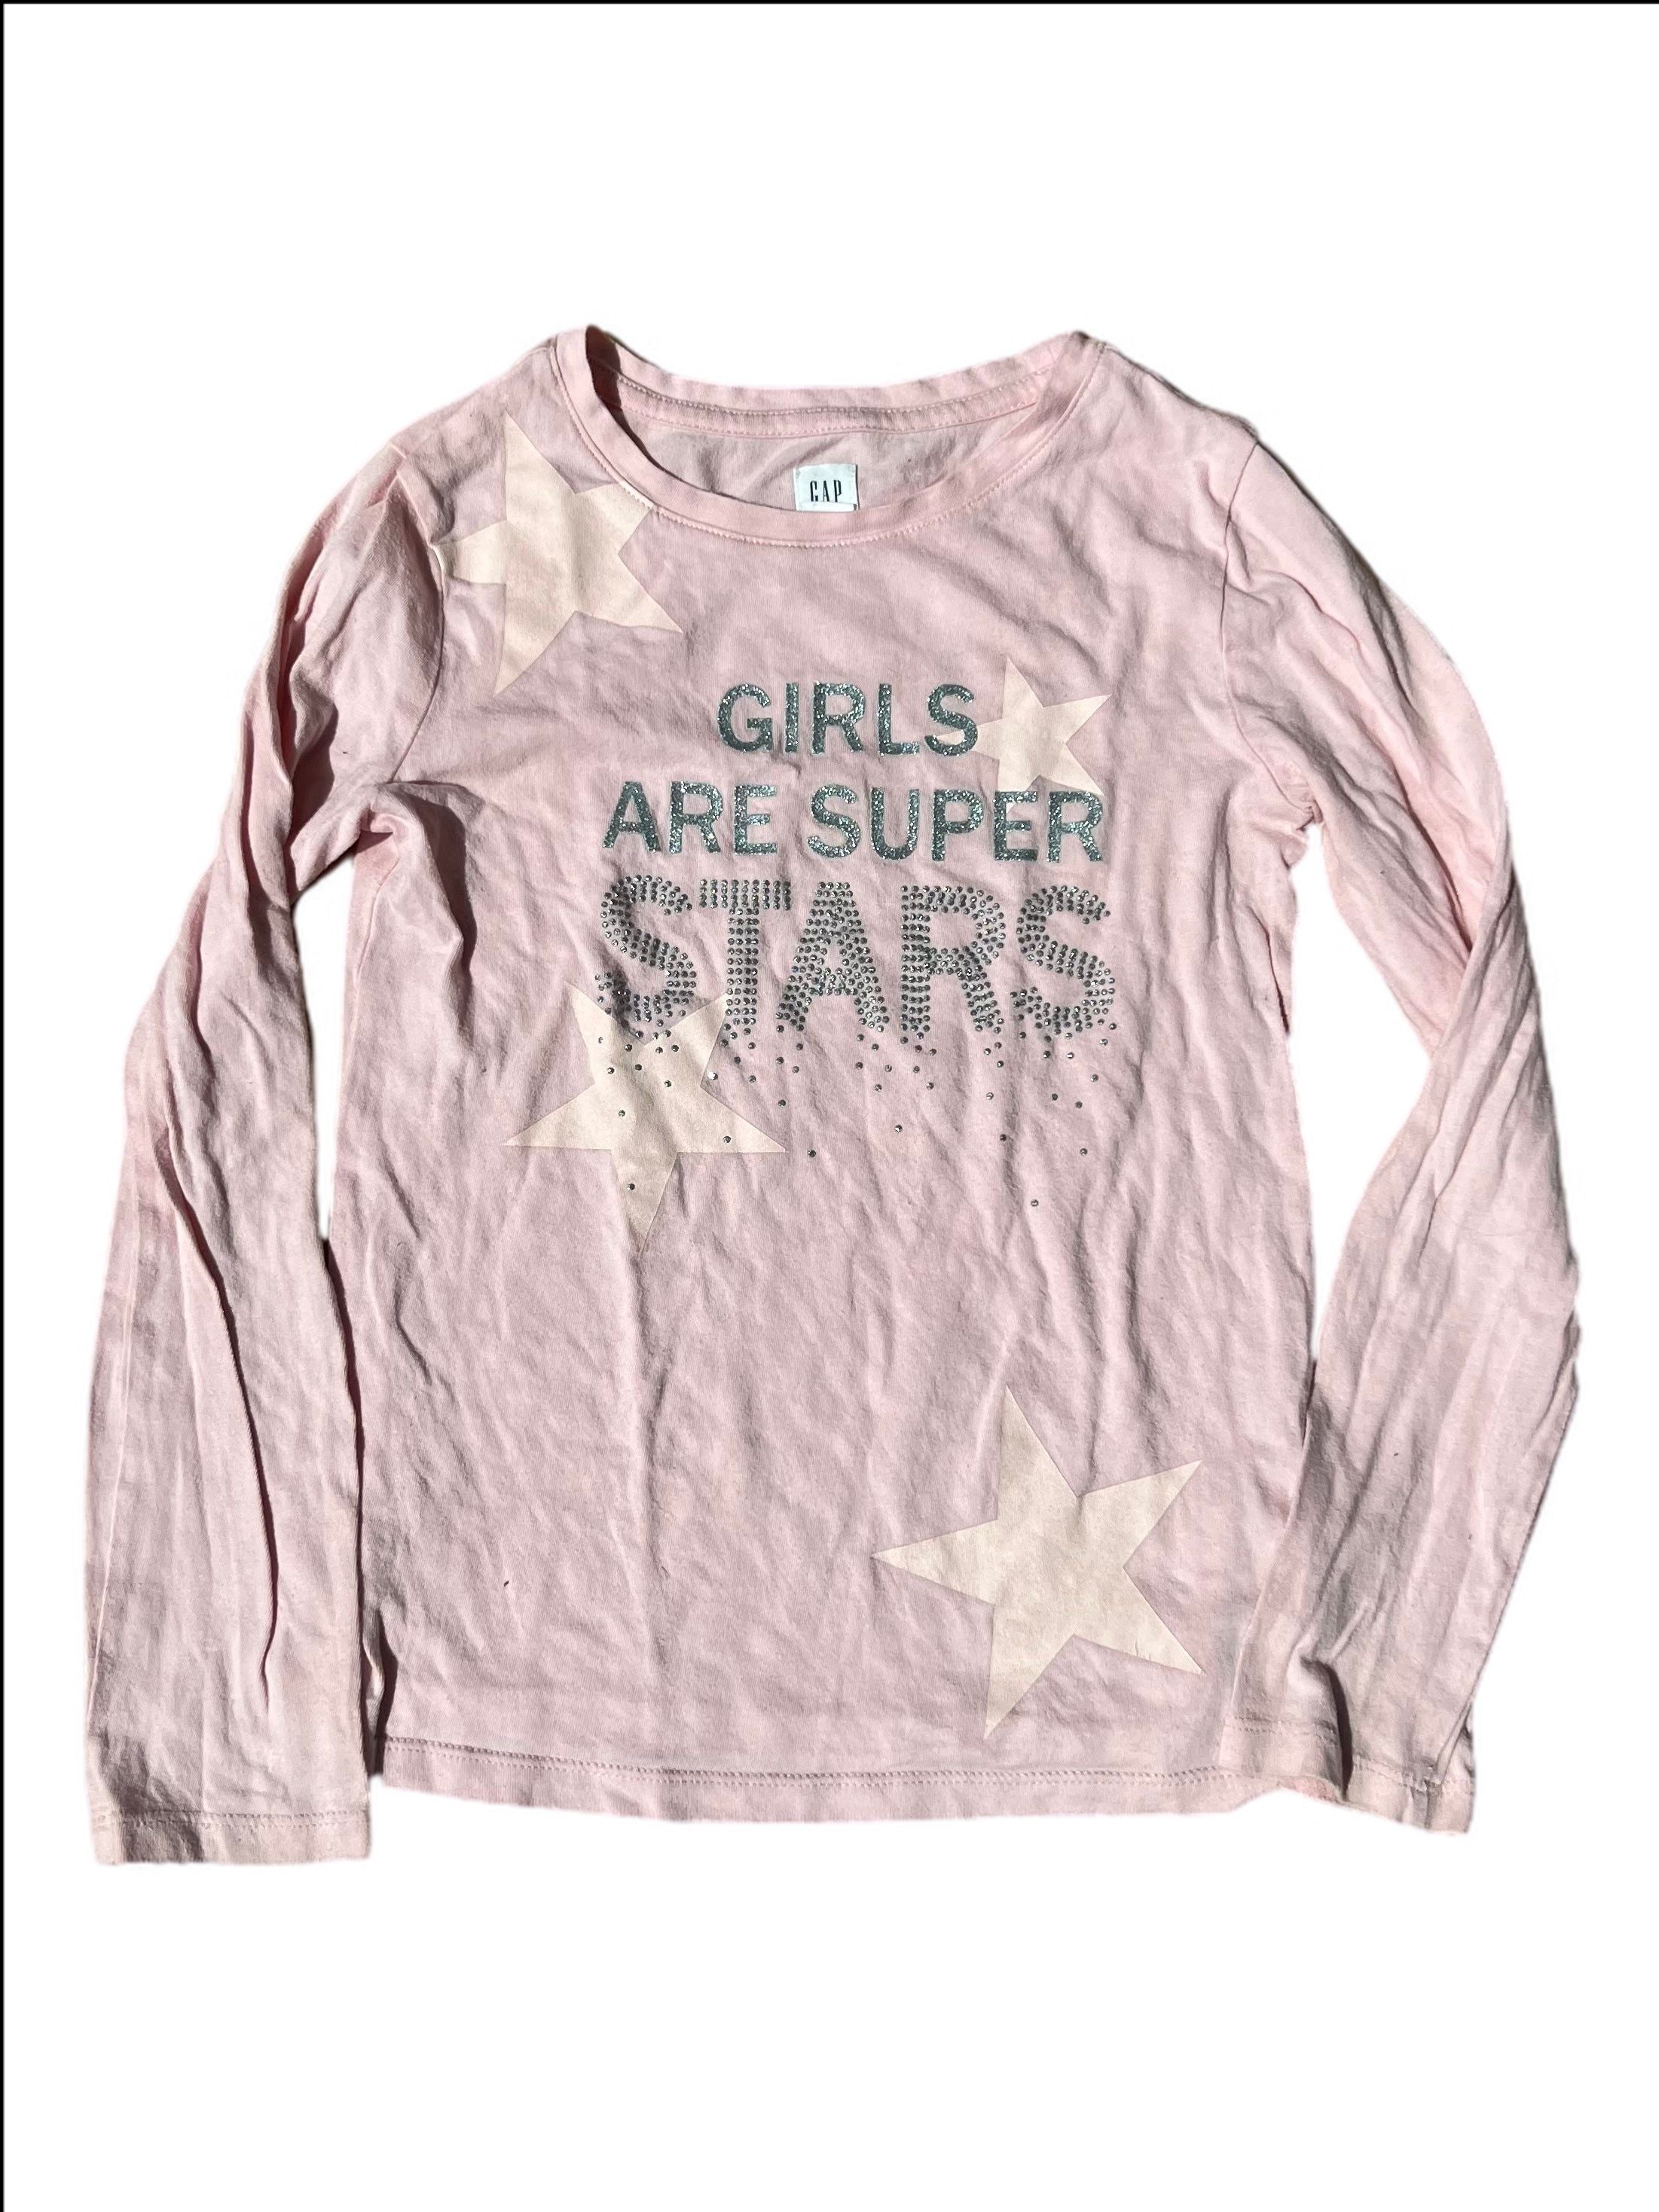 Long Sleeve, Girls are Super Stars Top